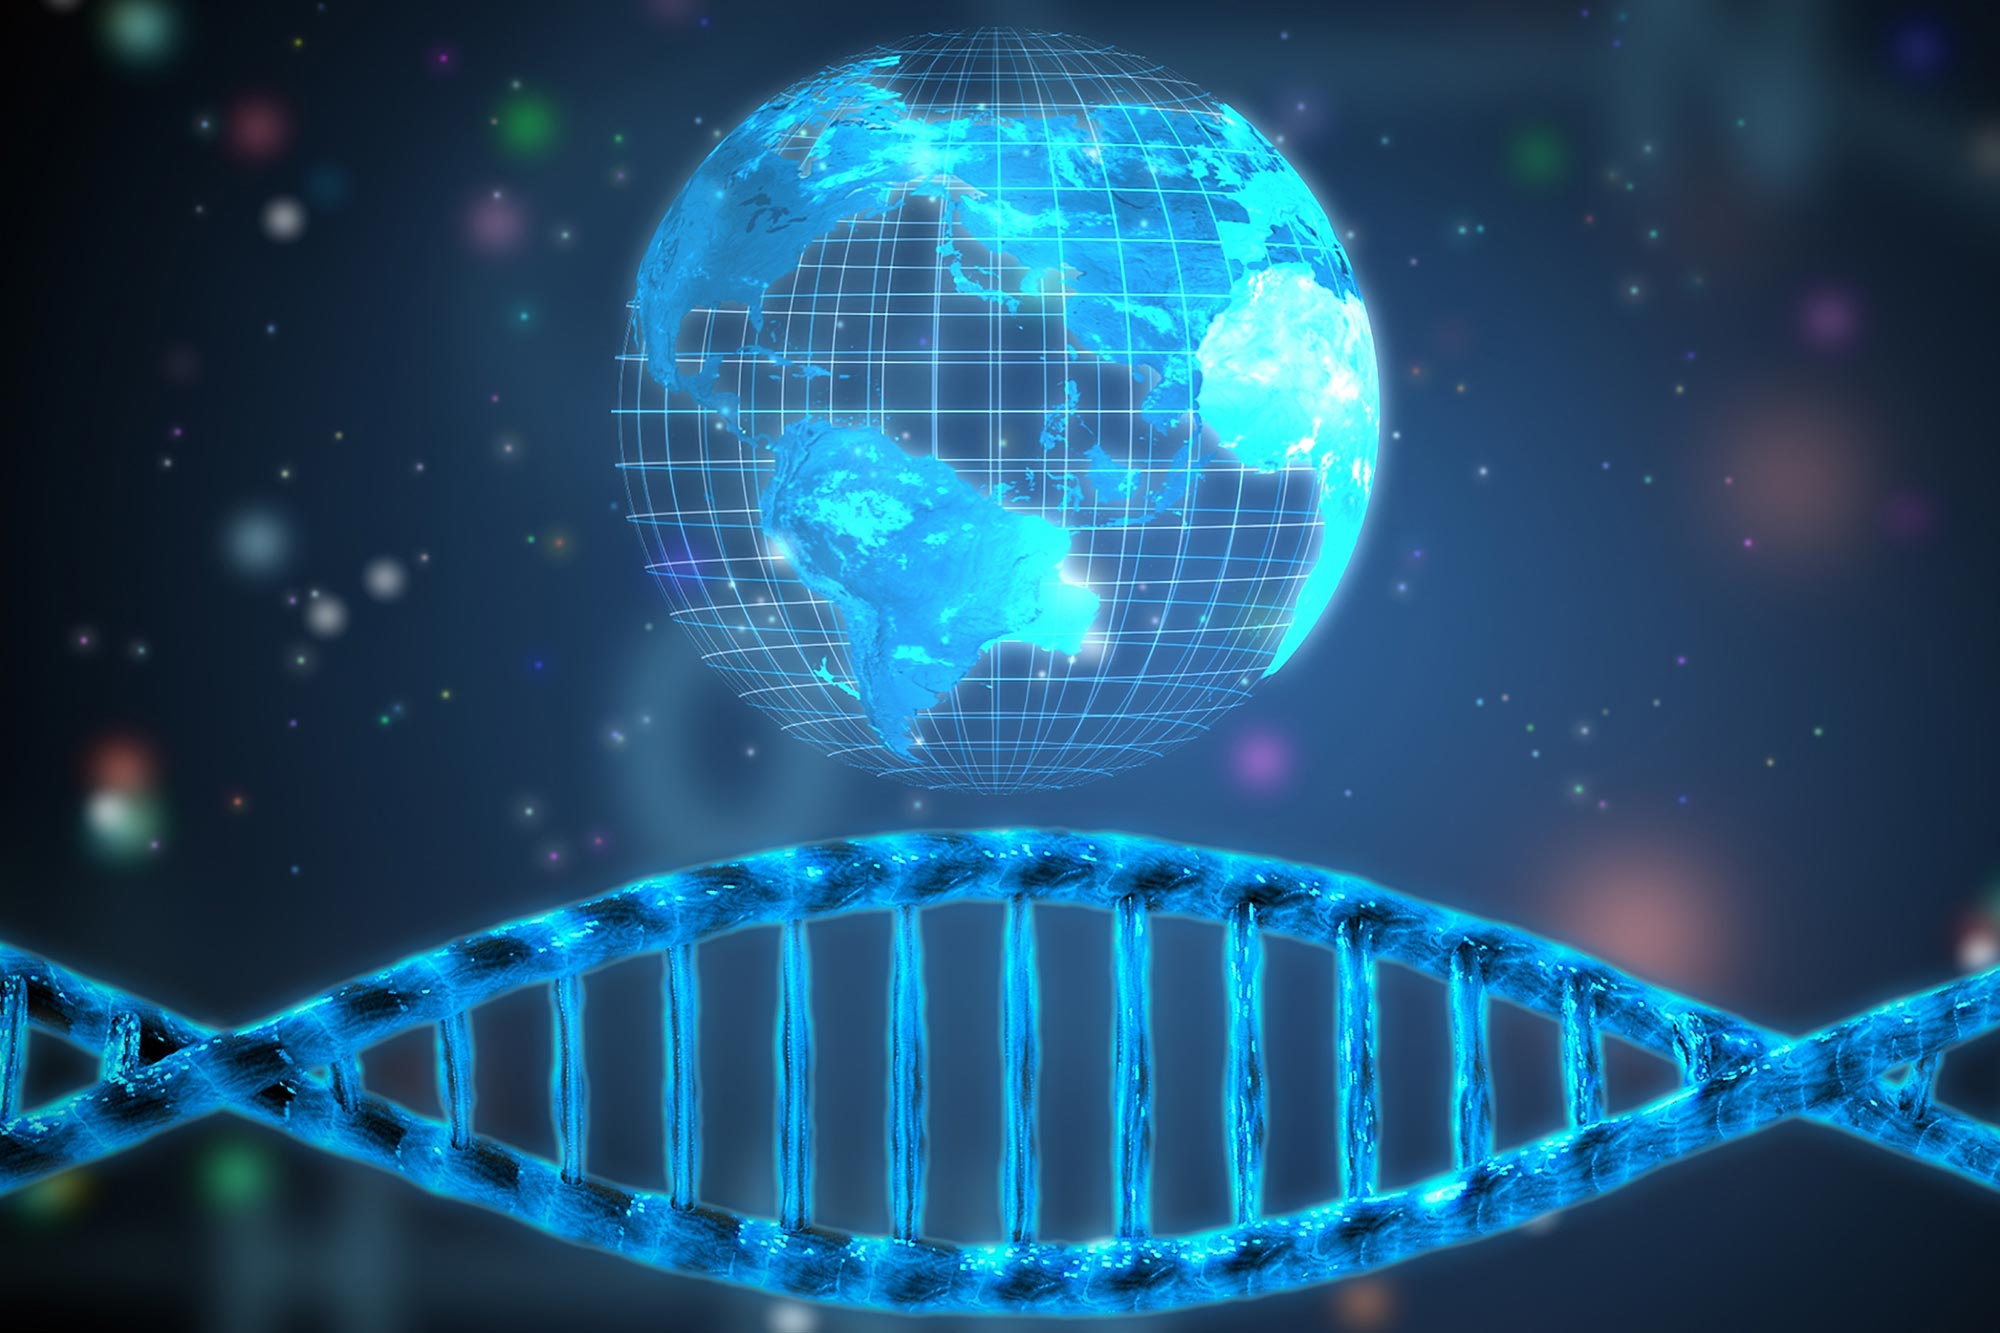 New Technology Increases Sequencing Power To Help Decode the Genome of All Life on Earth